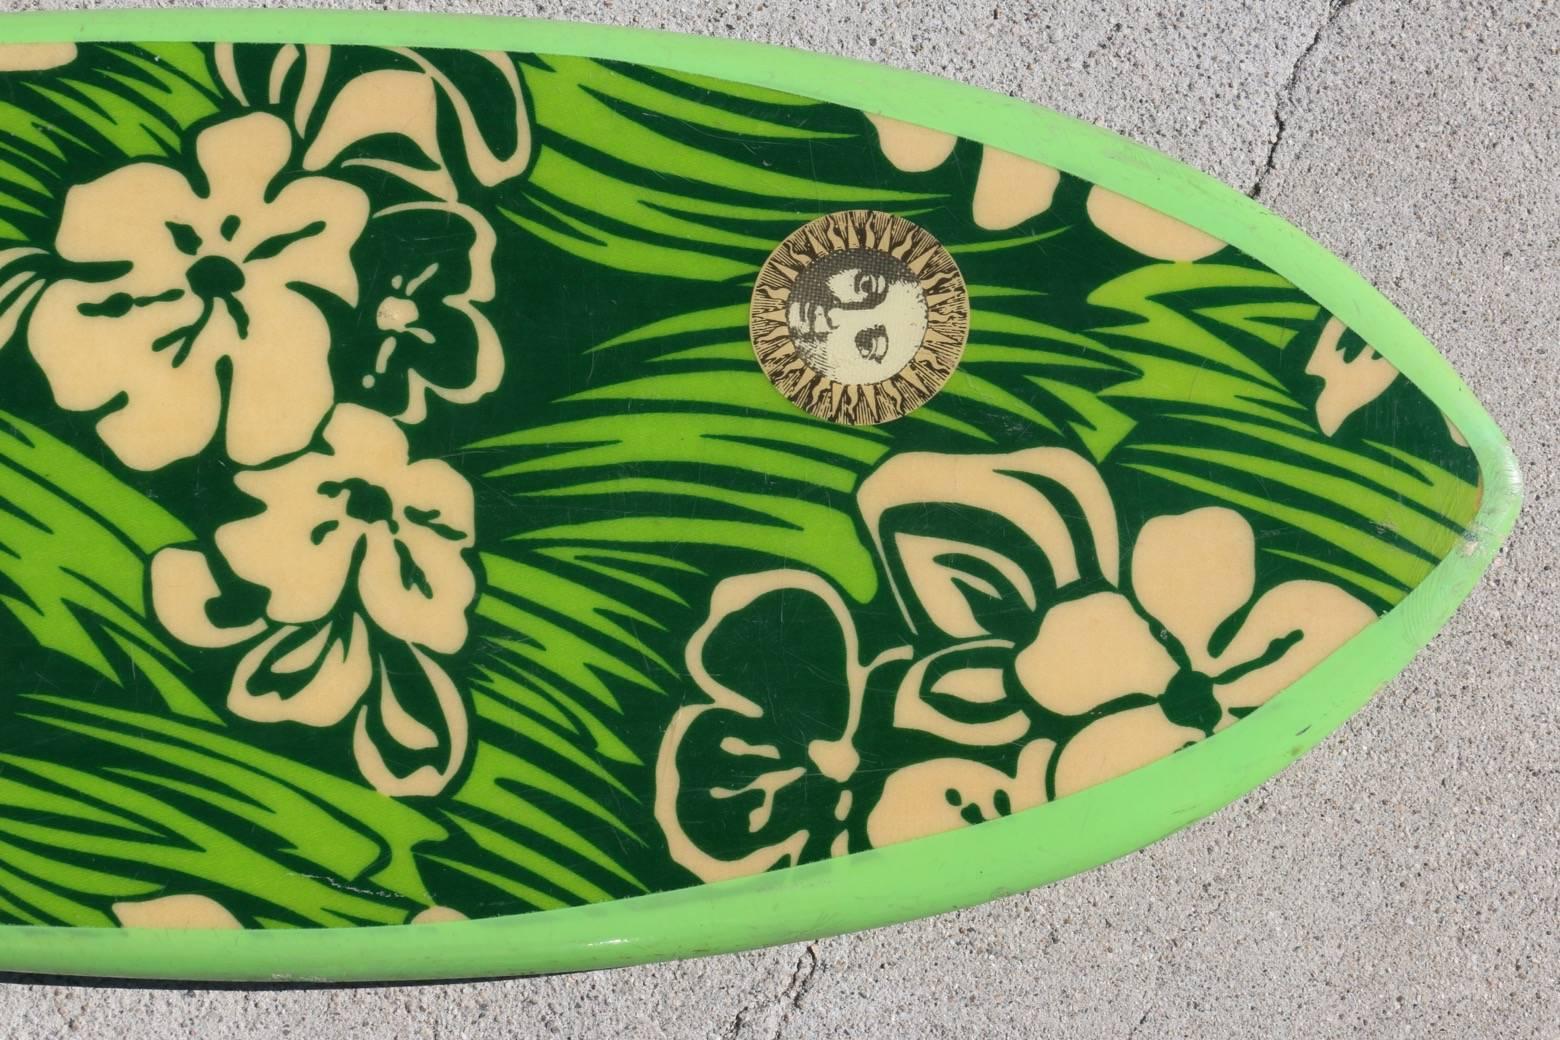 Mid-Century Modern Vibrant Green Floral Dextra Bellyboard Surfboard, circa 1965 For Sale